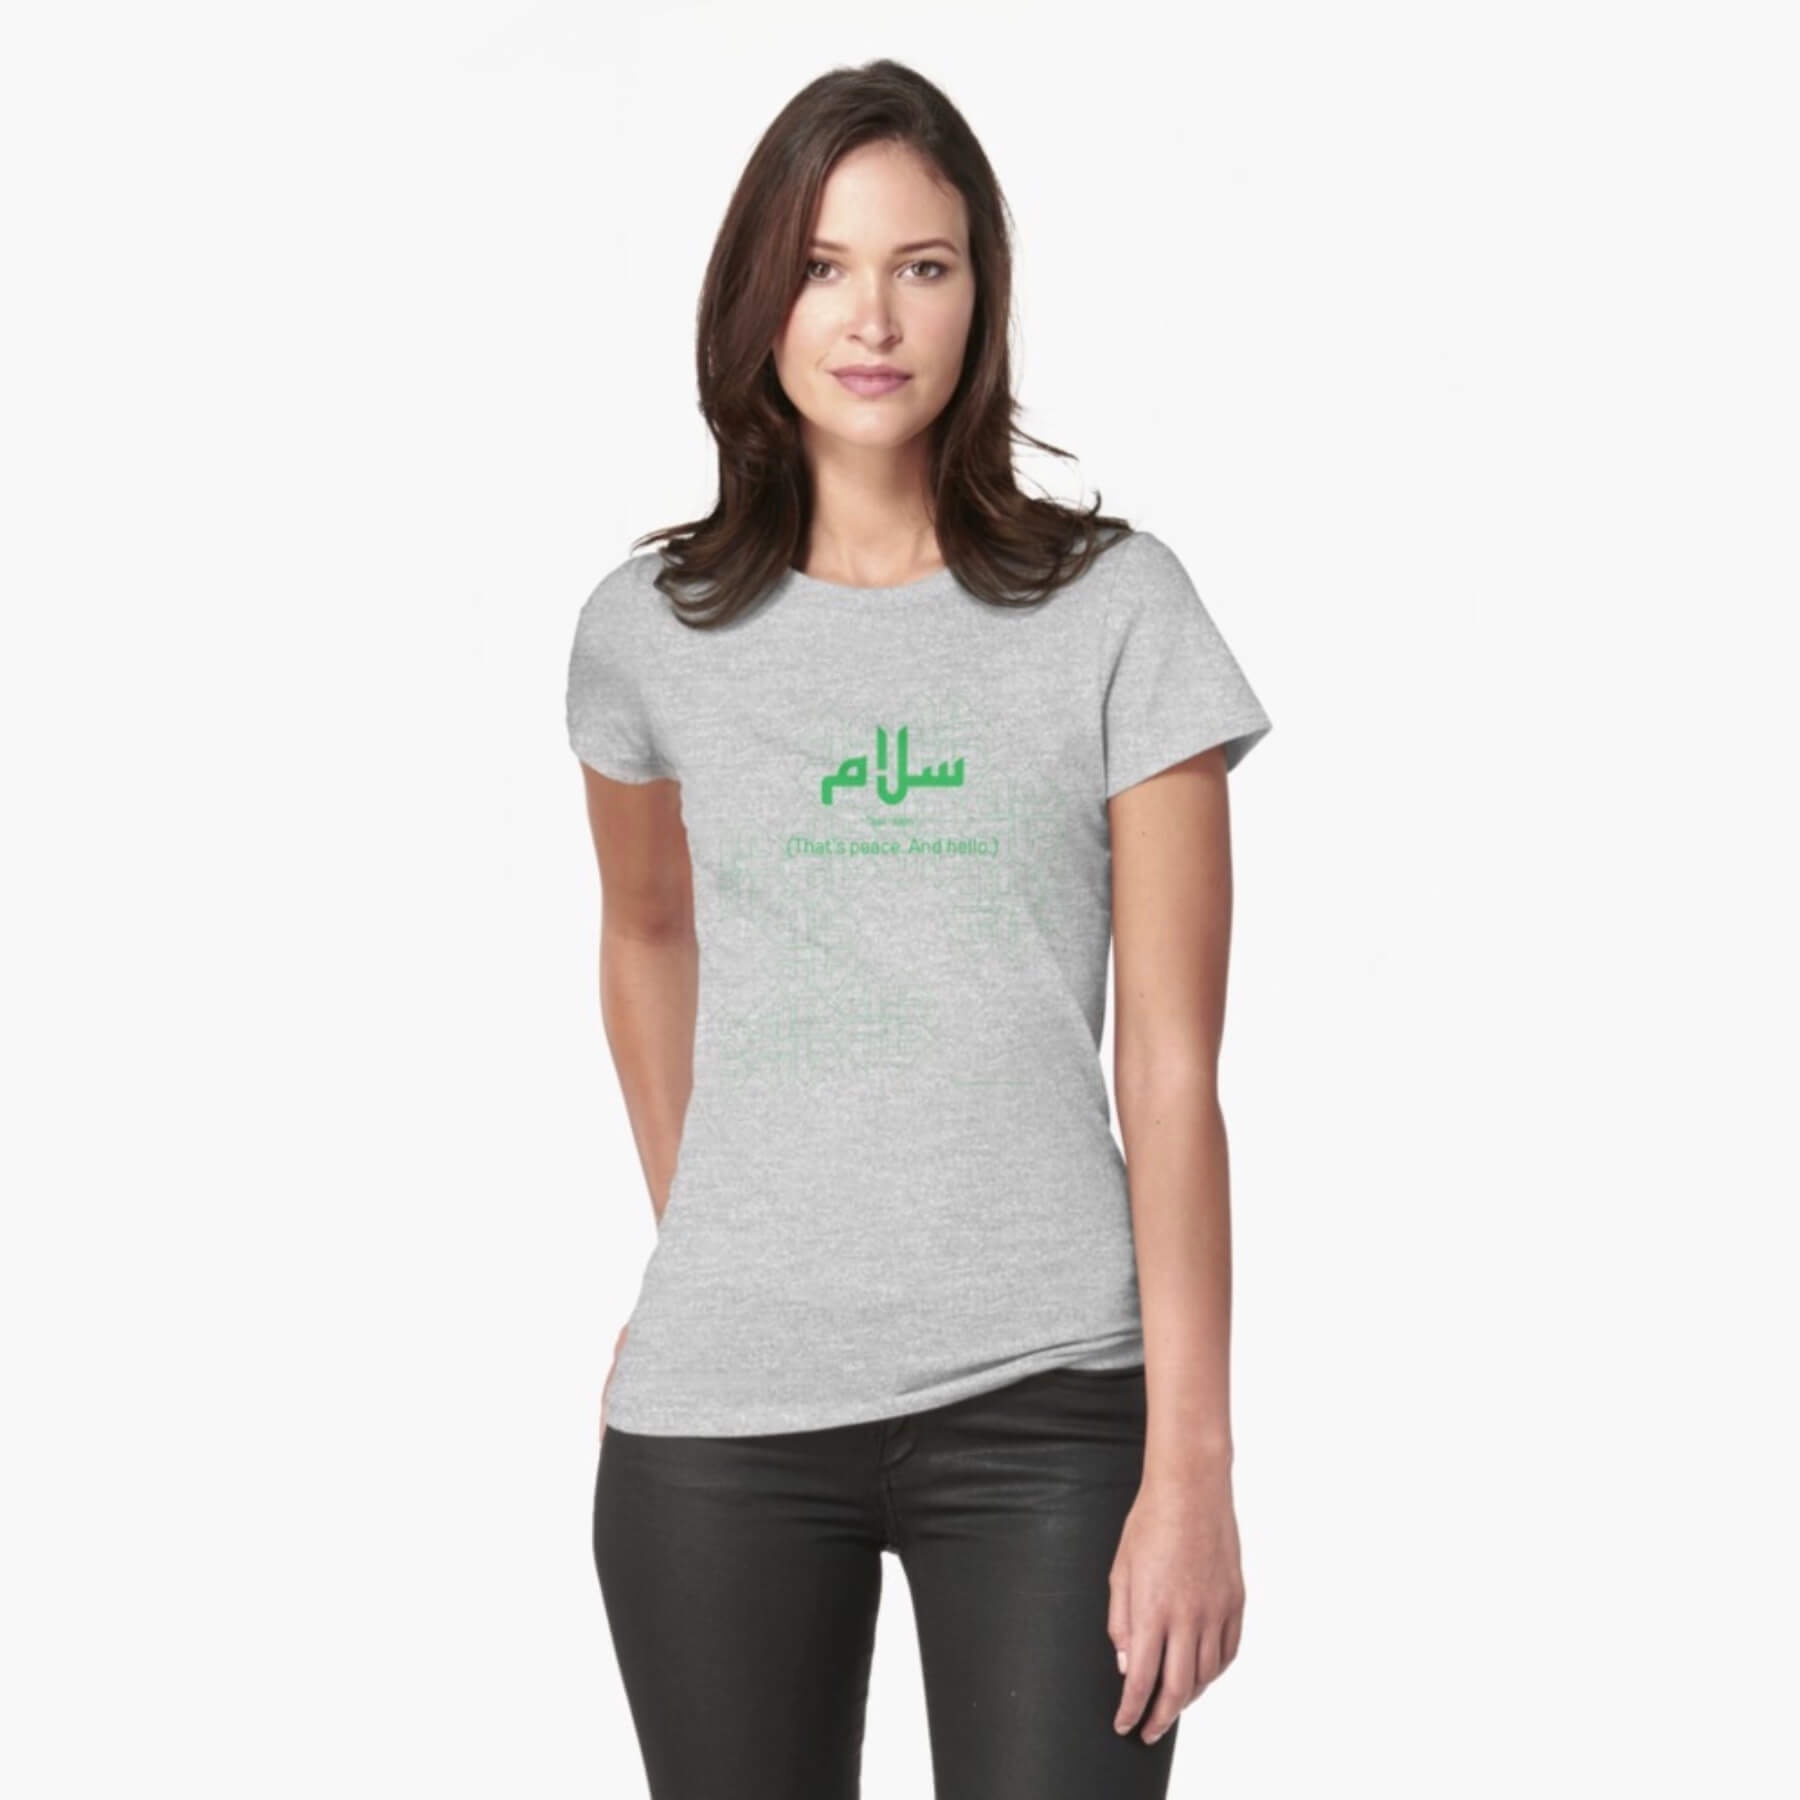 A white female model with hazel eyes and mid-brown shoulder length hair wears the Haluna Happy Names exclusive 'Salaam—Arabic Key Words' design purple fitted t-shirt and a pair of tight black jeans. The word 'salaam' is written in green in Arabic kufic-style font against a complementary green patterned background. The image cuts off mid-thigh. 